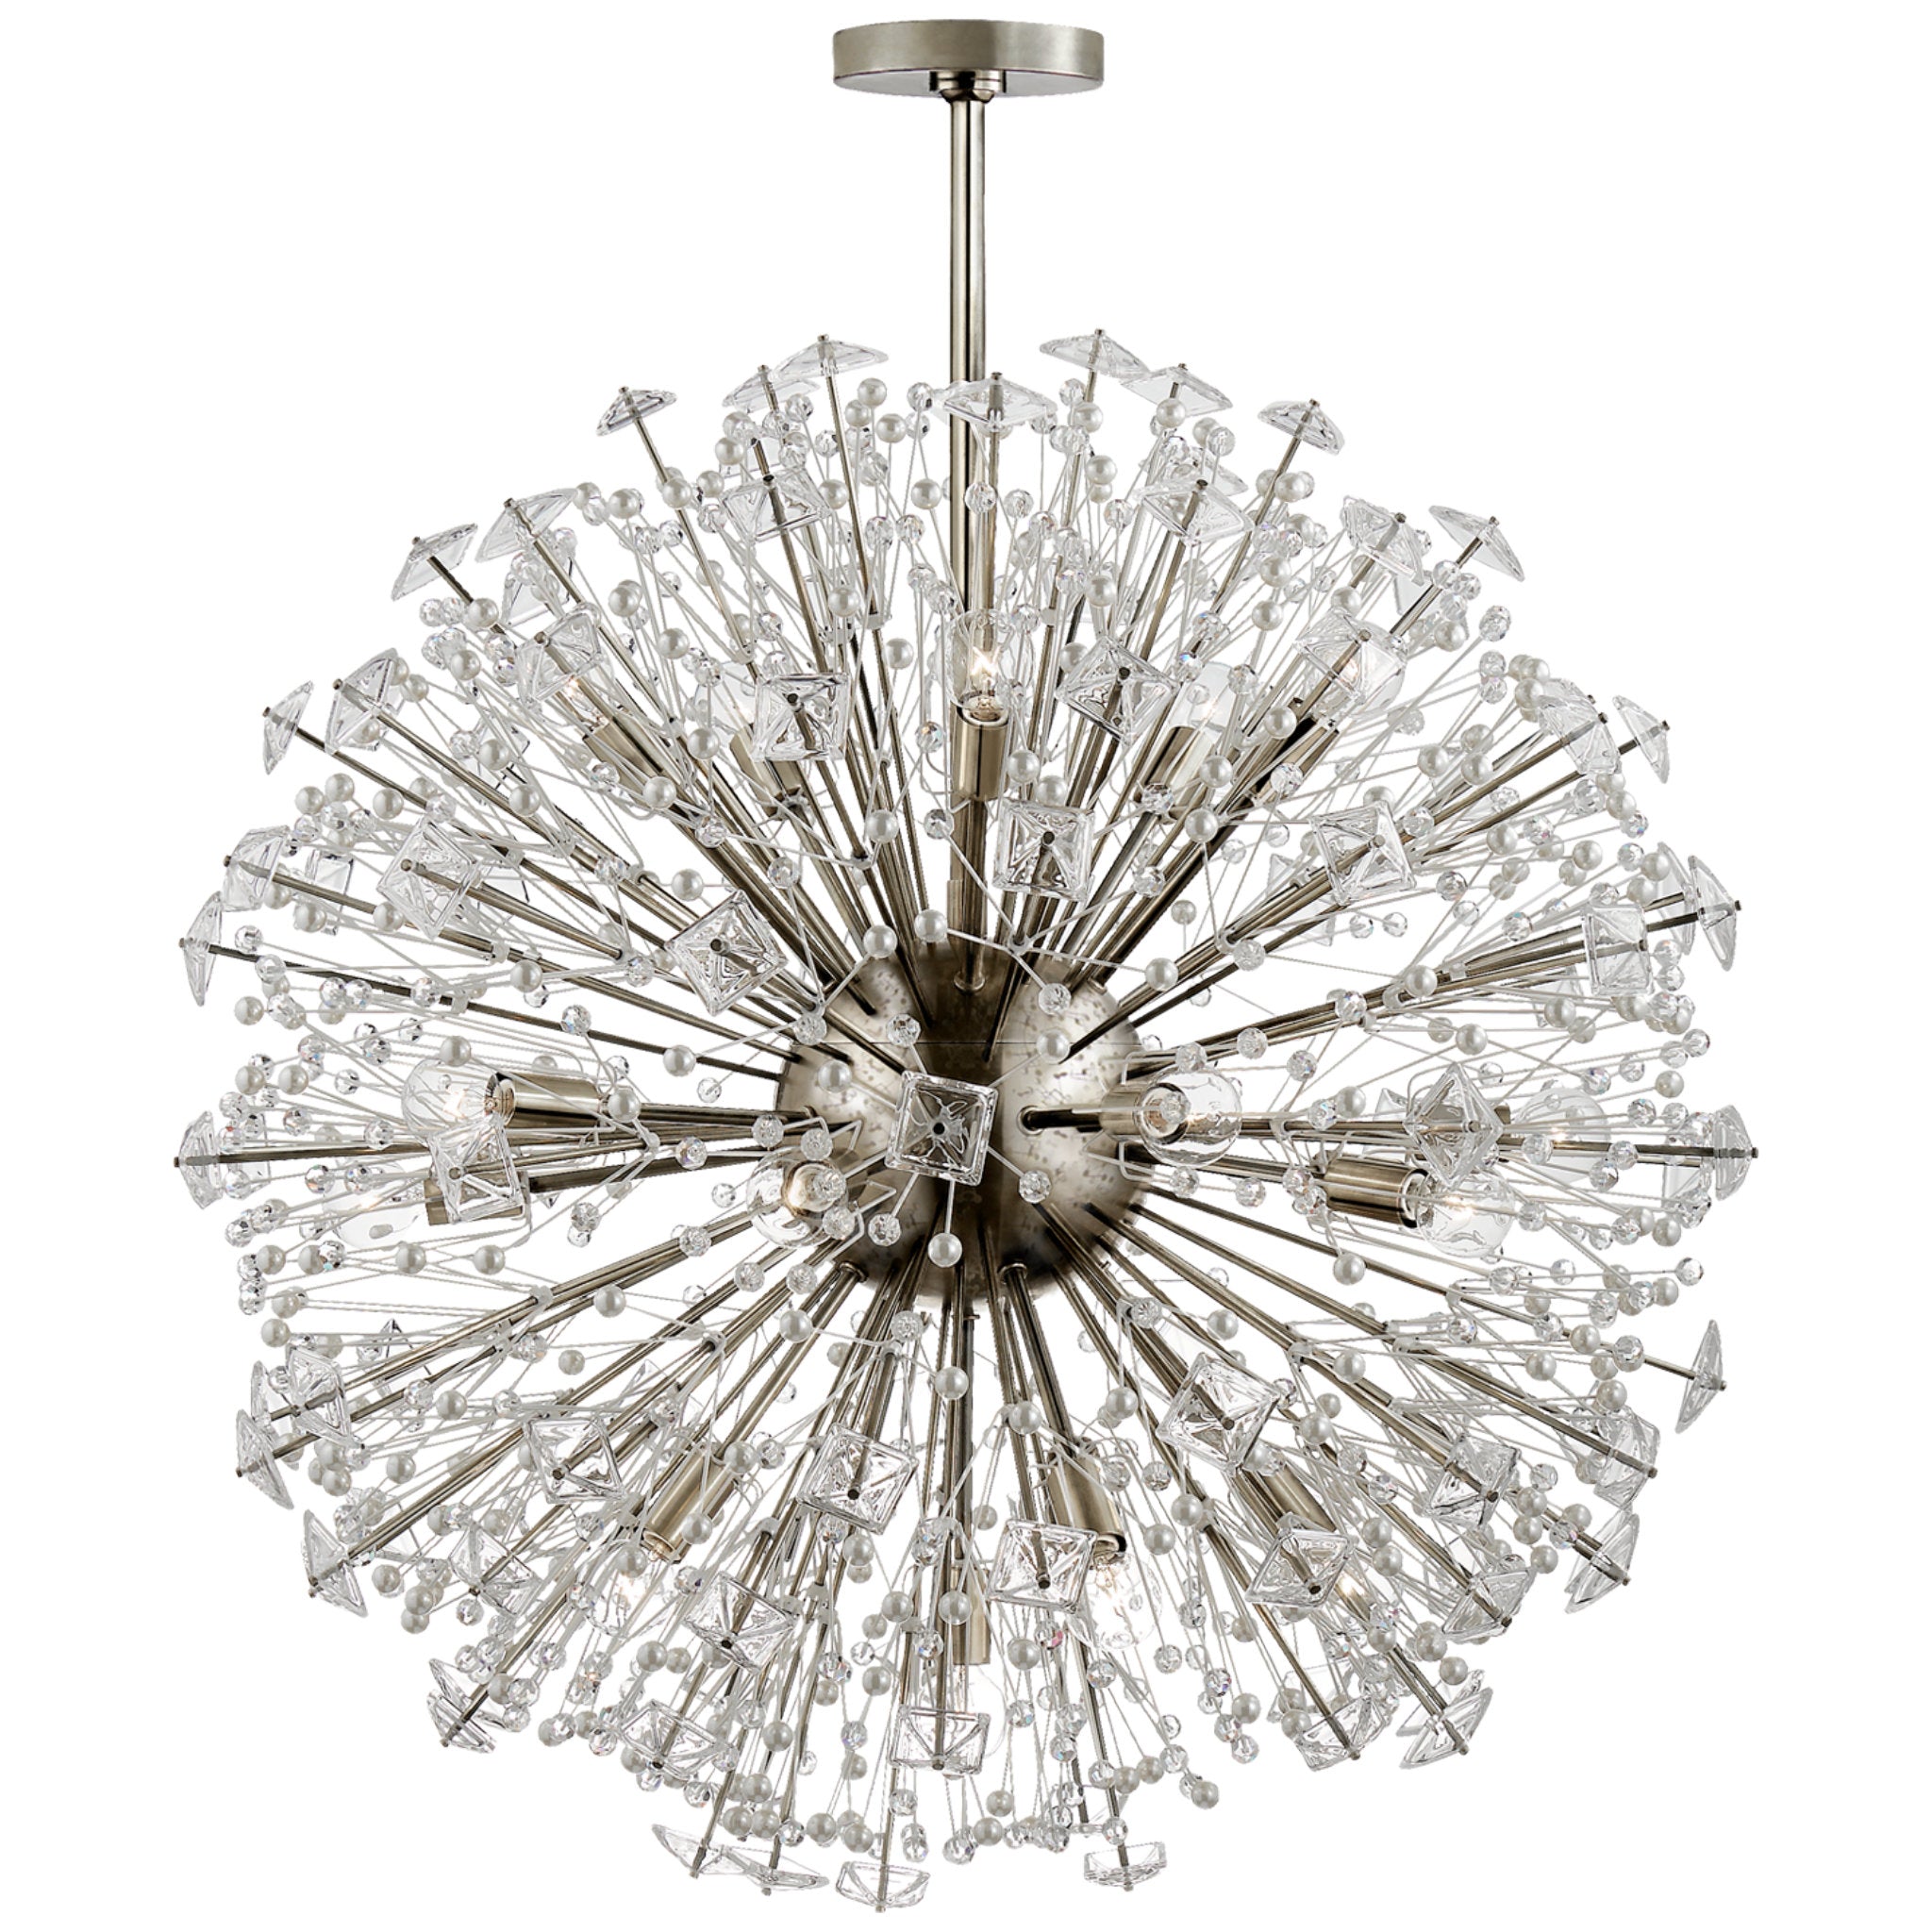 kate spade new york Dickinson Large Chandelier in Polished Nickel with Clear Glass and Cream Pearls